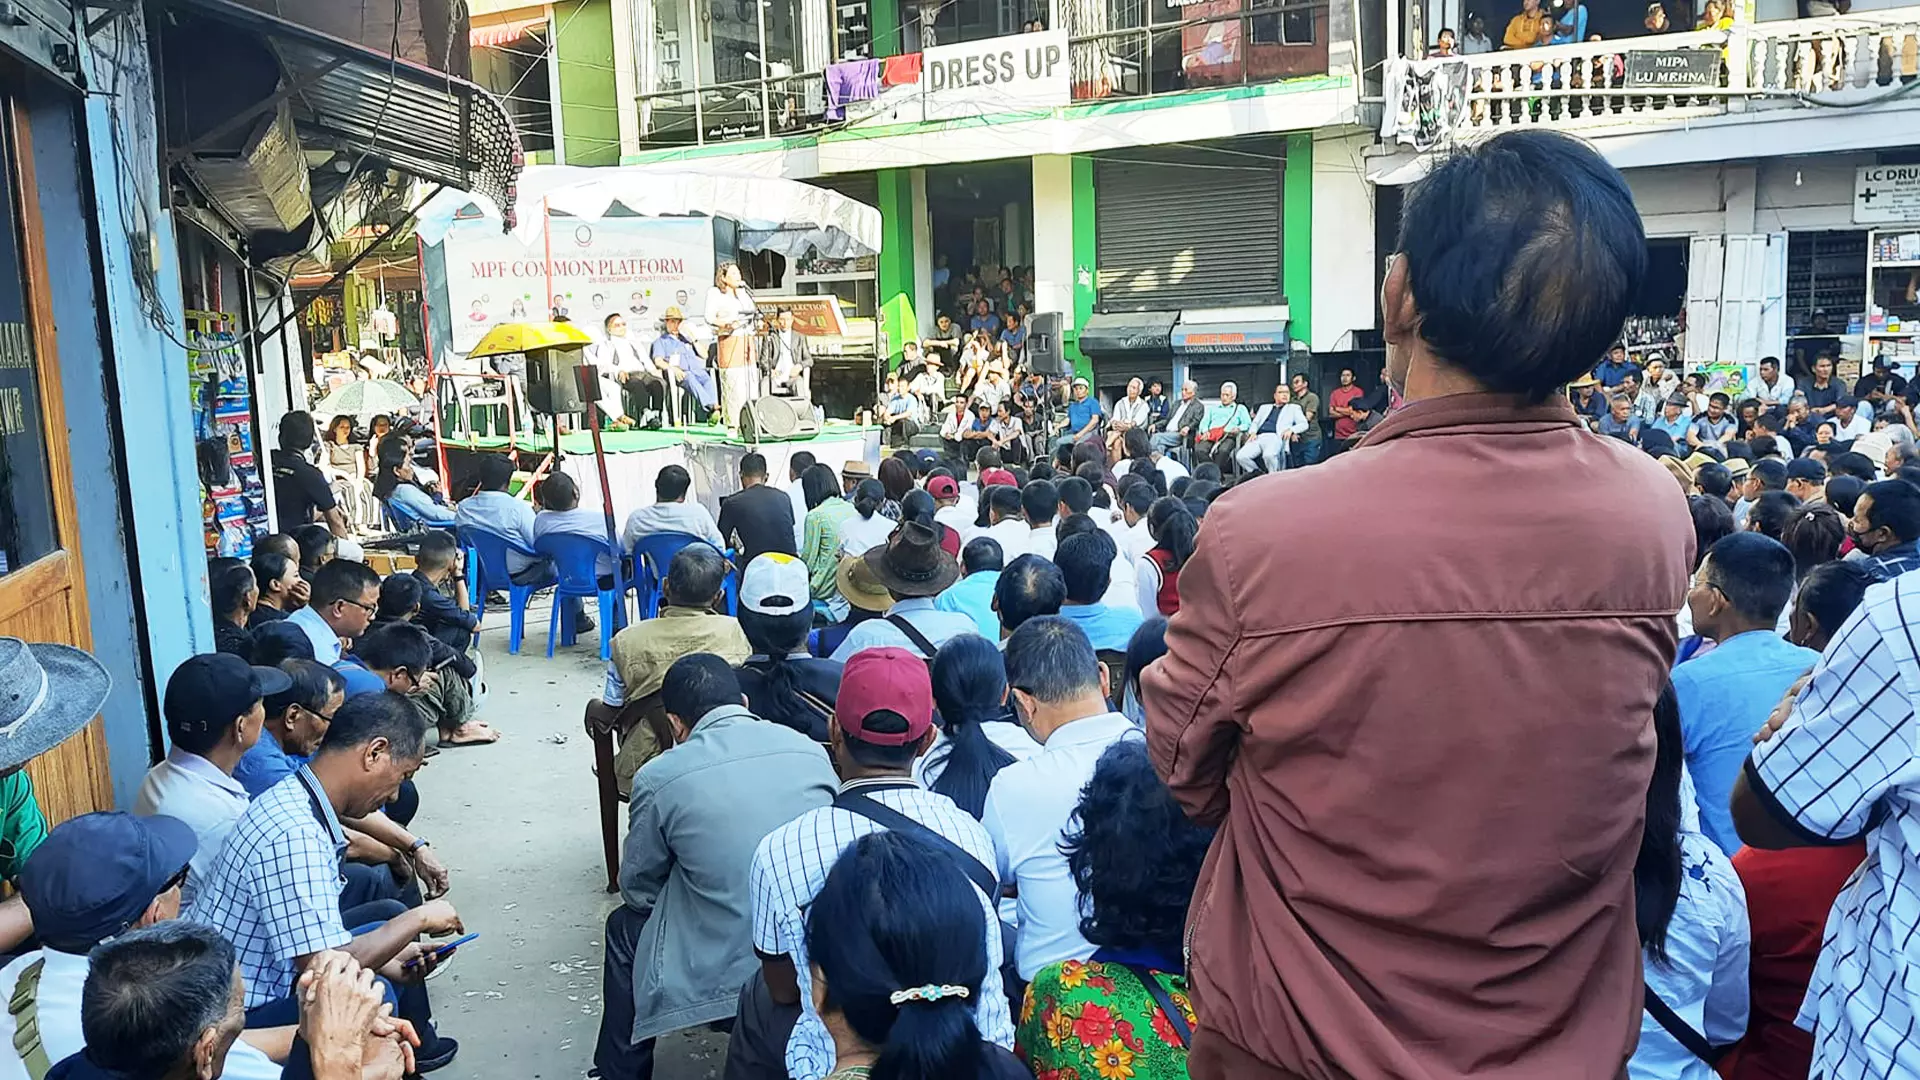 People attend a common platform in Mizoram. Mizoram stands as an aberration to high-pitched campaigns marked by cacophonies of tall promises, riots of posters, hoardings and billboards.